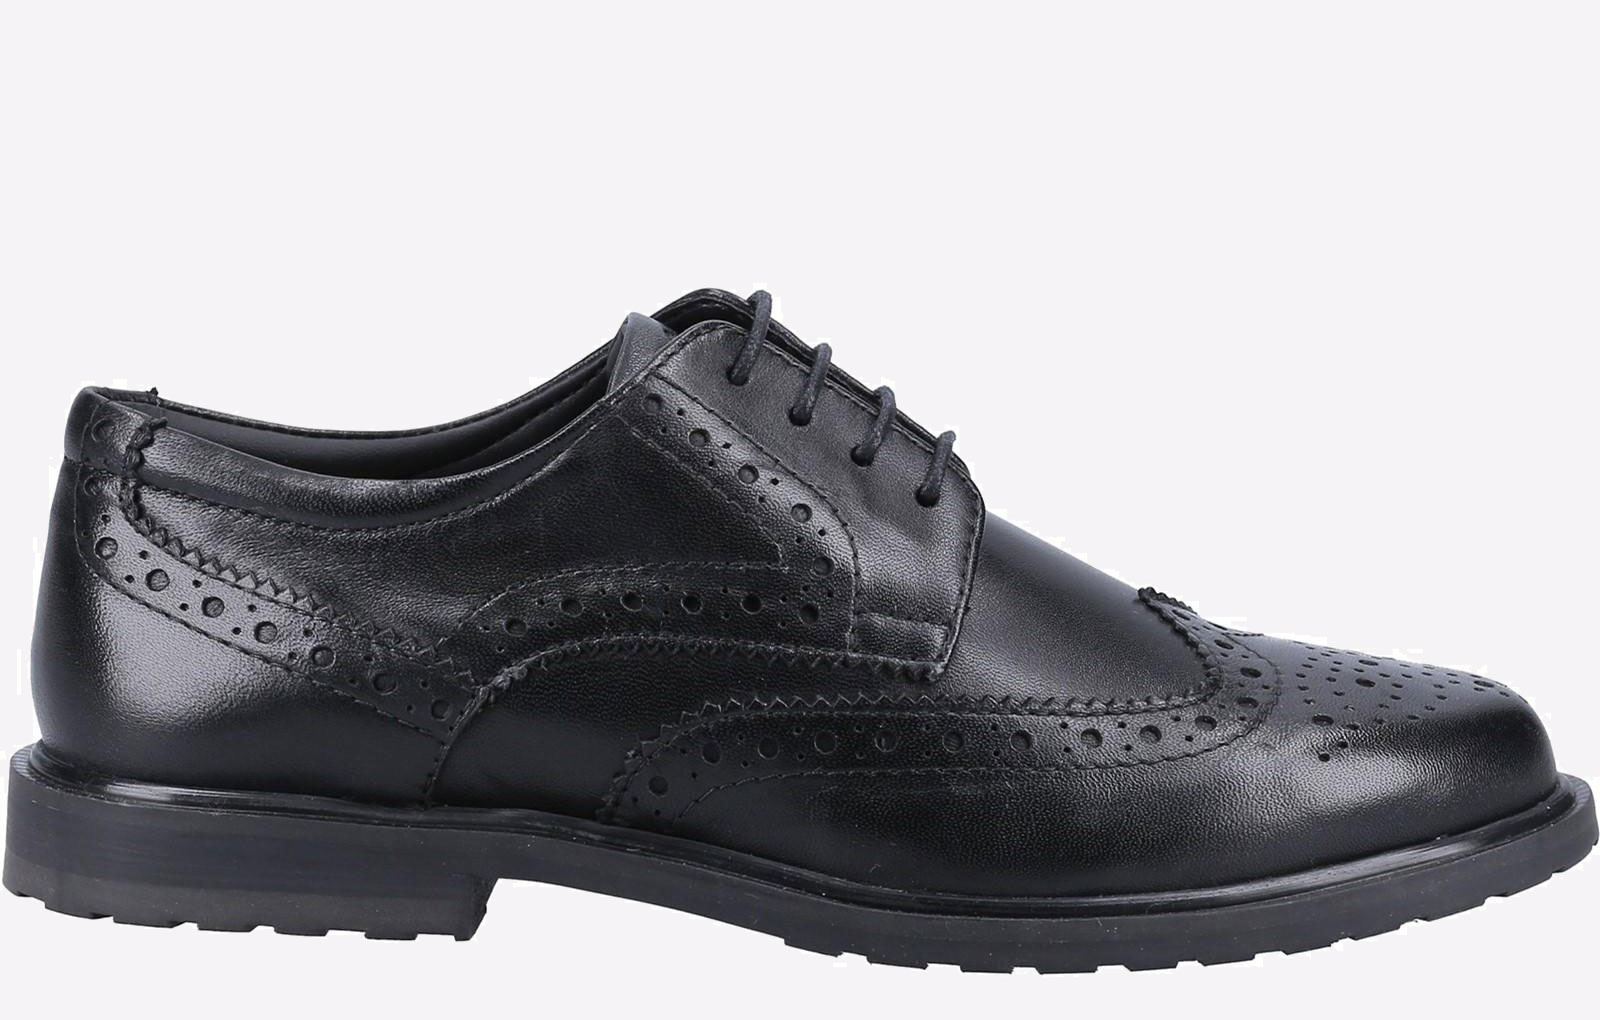 Hush Puppies) Mens Hush Puppies Lace Up Brogues in Black | DEICHMANN